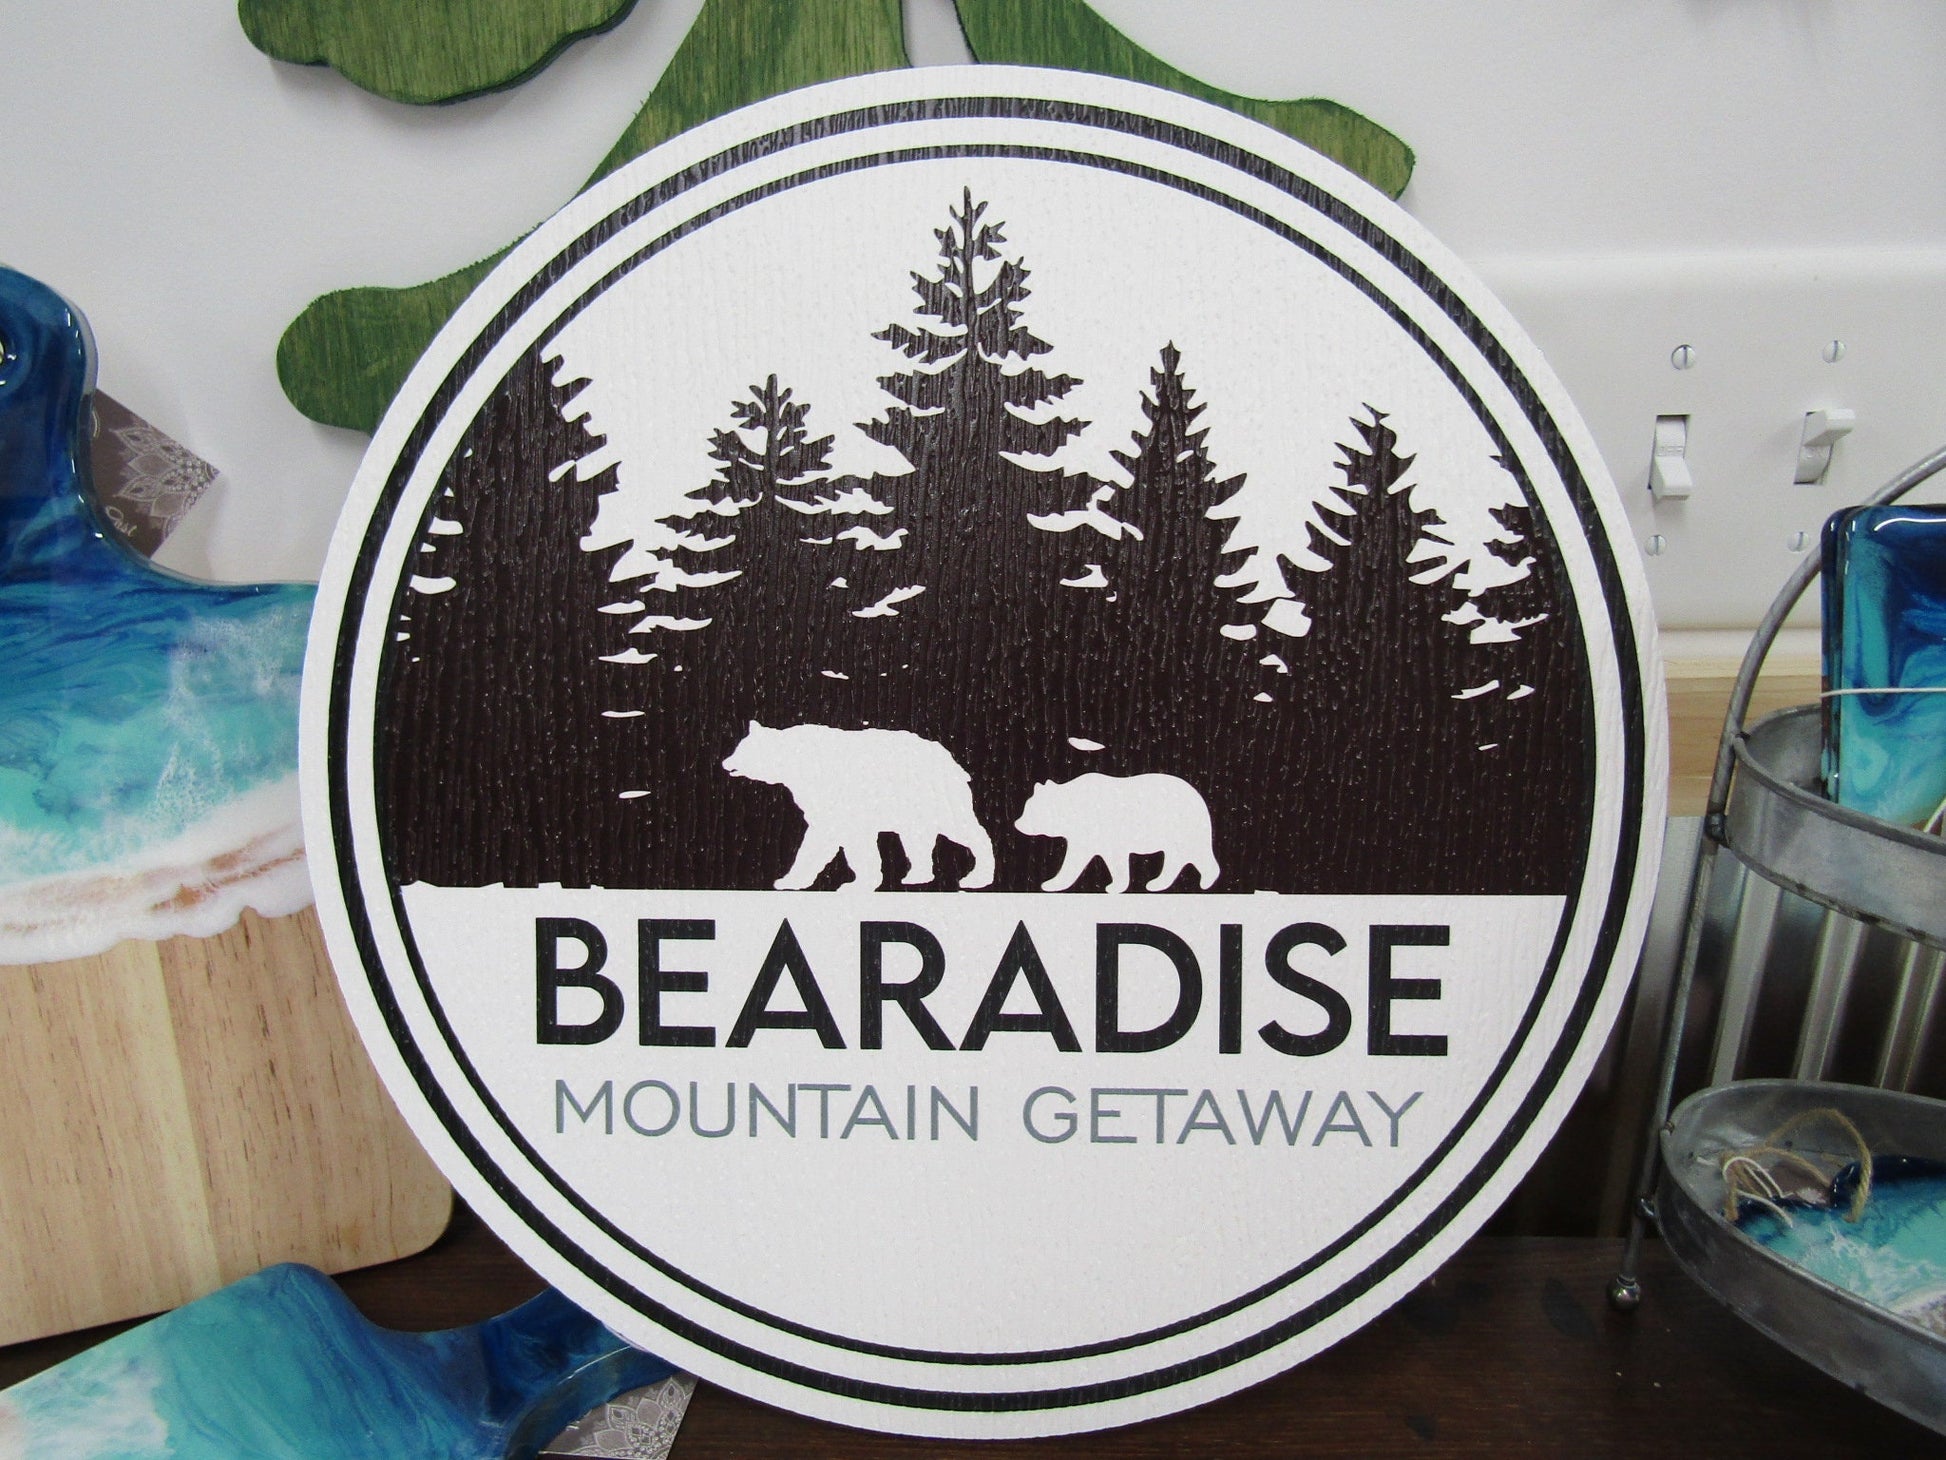 Custom Cabin Pine Trees Wilderness Bears Textured PVC Weather Fade Resistant Waterproof Uv Printed Color Logo Business Commerical Signage